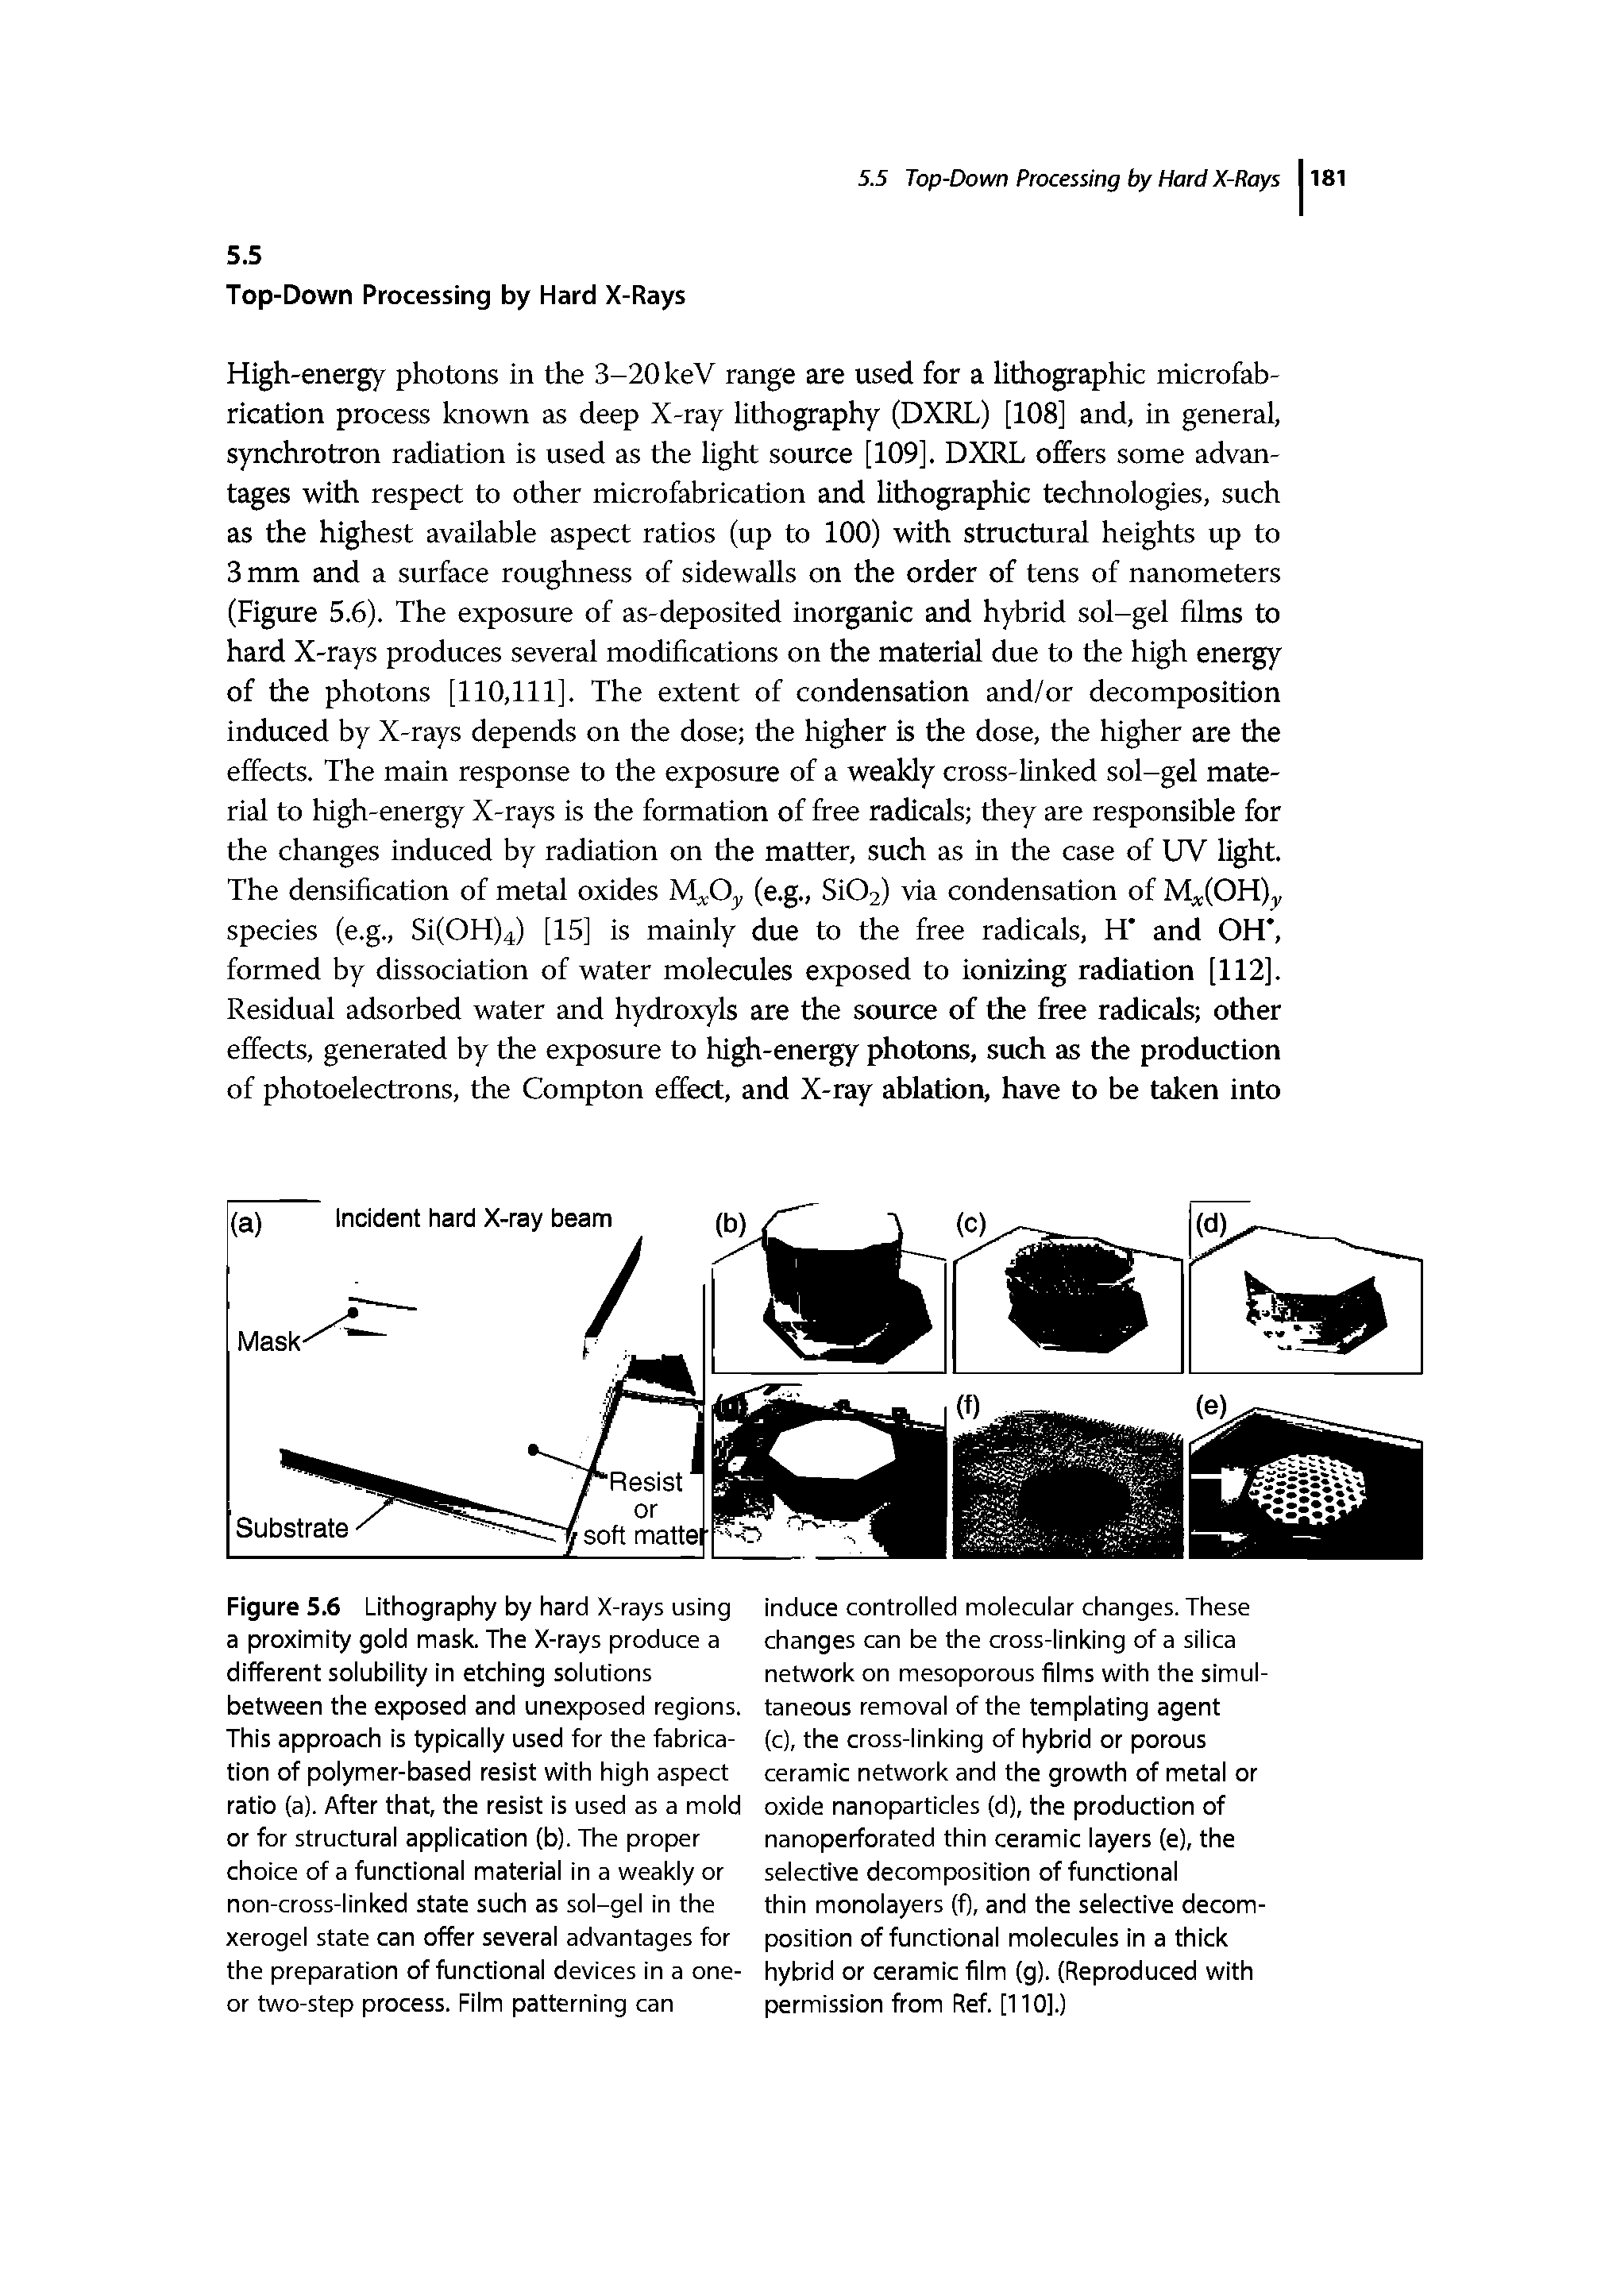 Figure 5.6 Lithography by hard X-rays using a proximity gold mask. The X-rays produce a different solubility in etching solutions between the exposed and unexposed regions. This approach is typically used for the fabrication of polymer-based resist with high aspect ratio (a). After that the resist is used as a mold or for structural application (b). The proper choice of a functional material in a weakly or non-cross-linked state such as sol-gel in the xerogel state can offer several advantages for the preparation of functional devices in a one-or two-step process. Film patterning can...